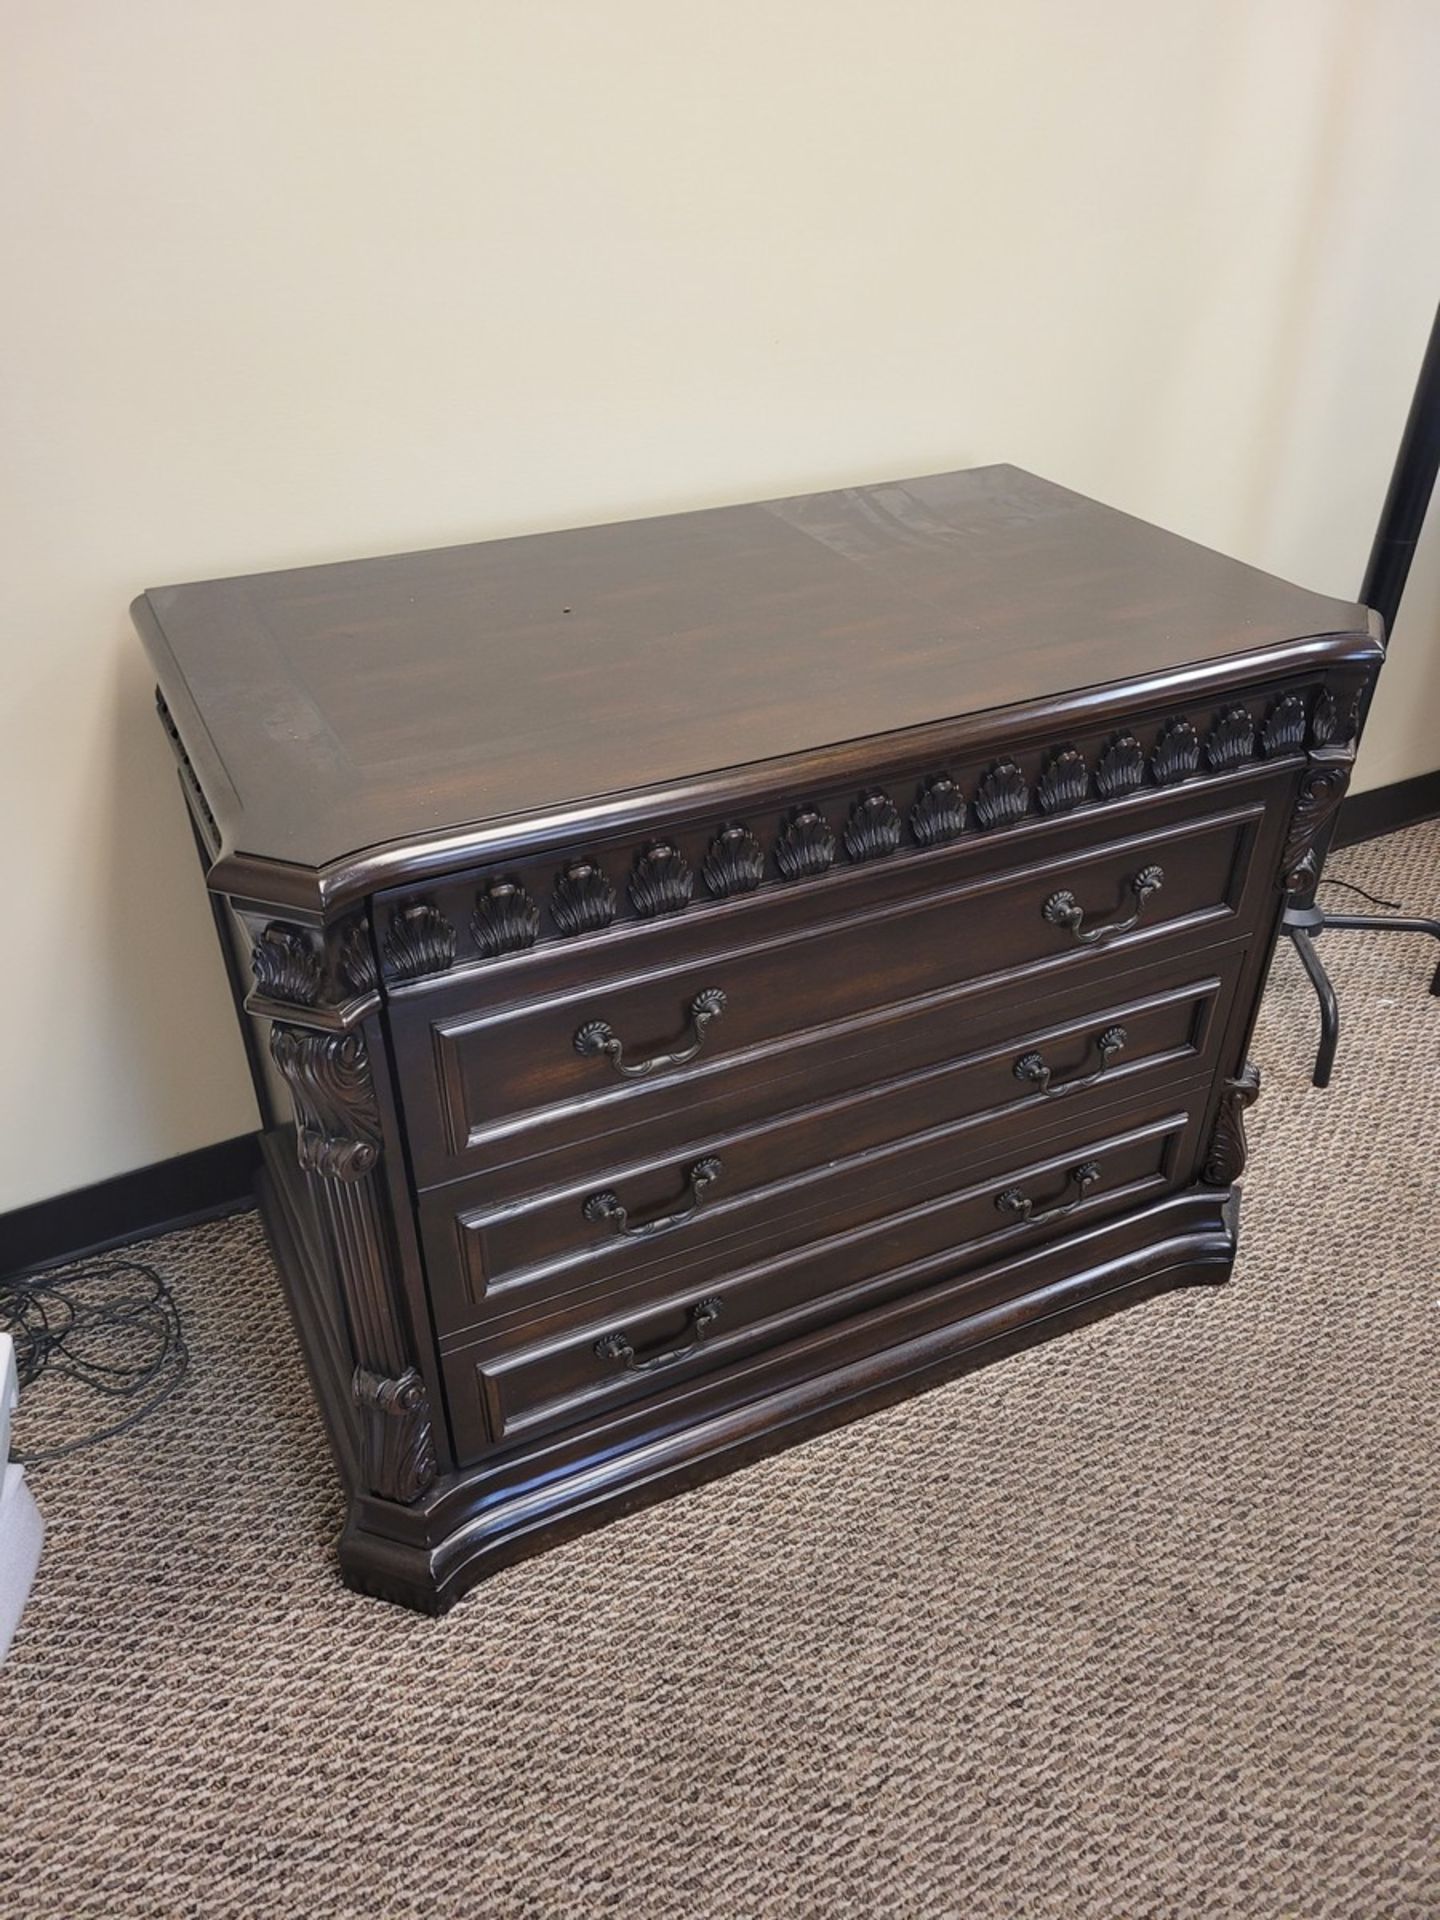 Executive Office Furniture - Image 5 of 7